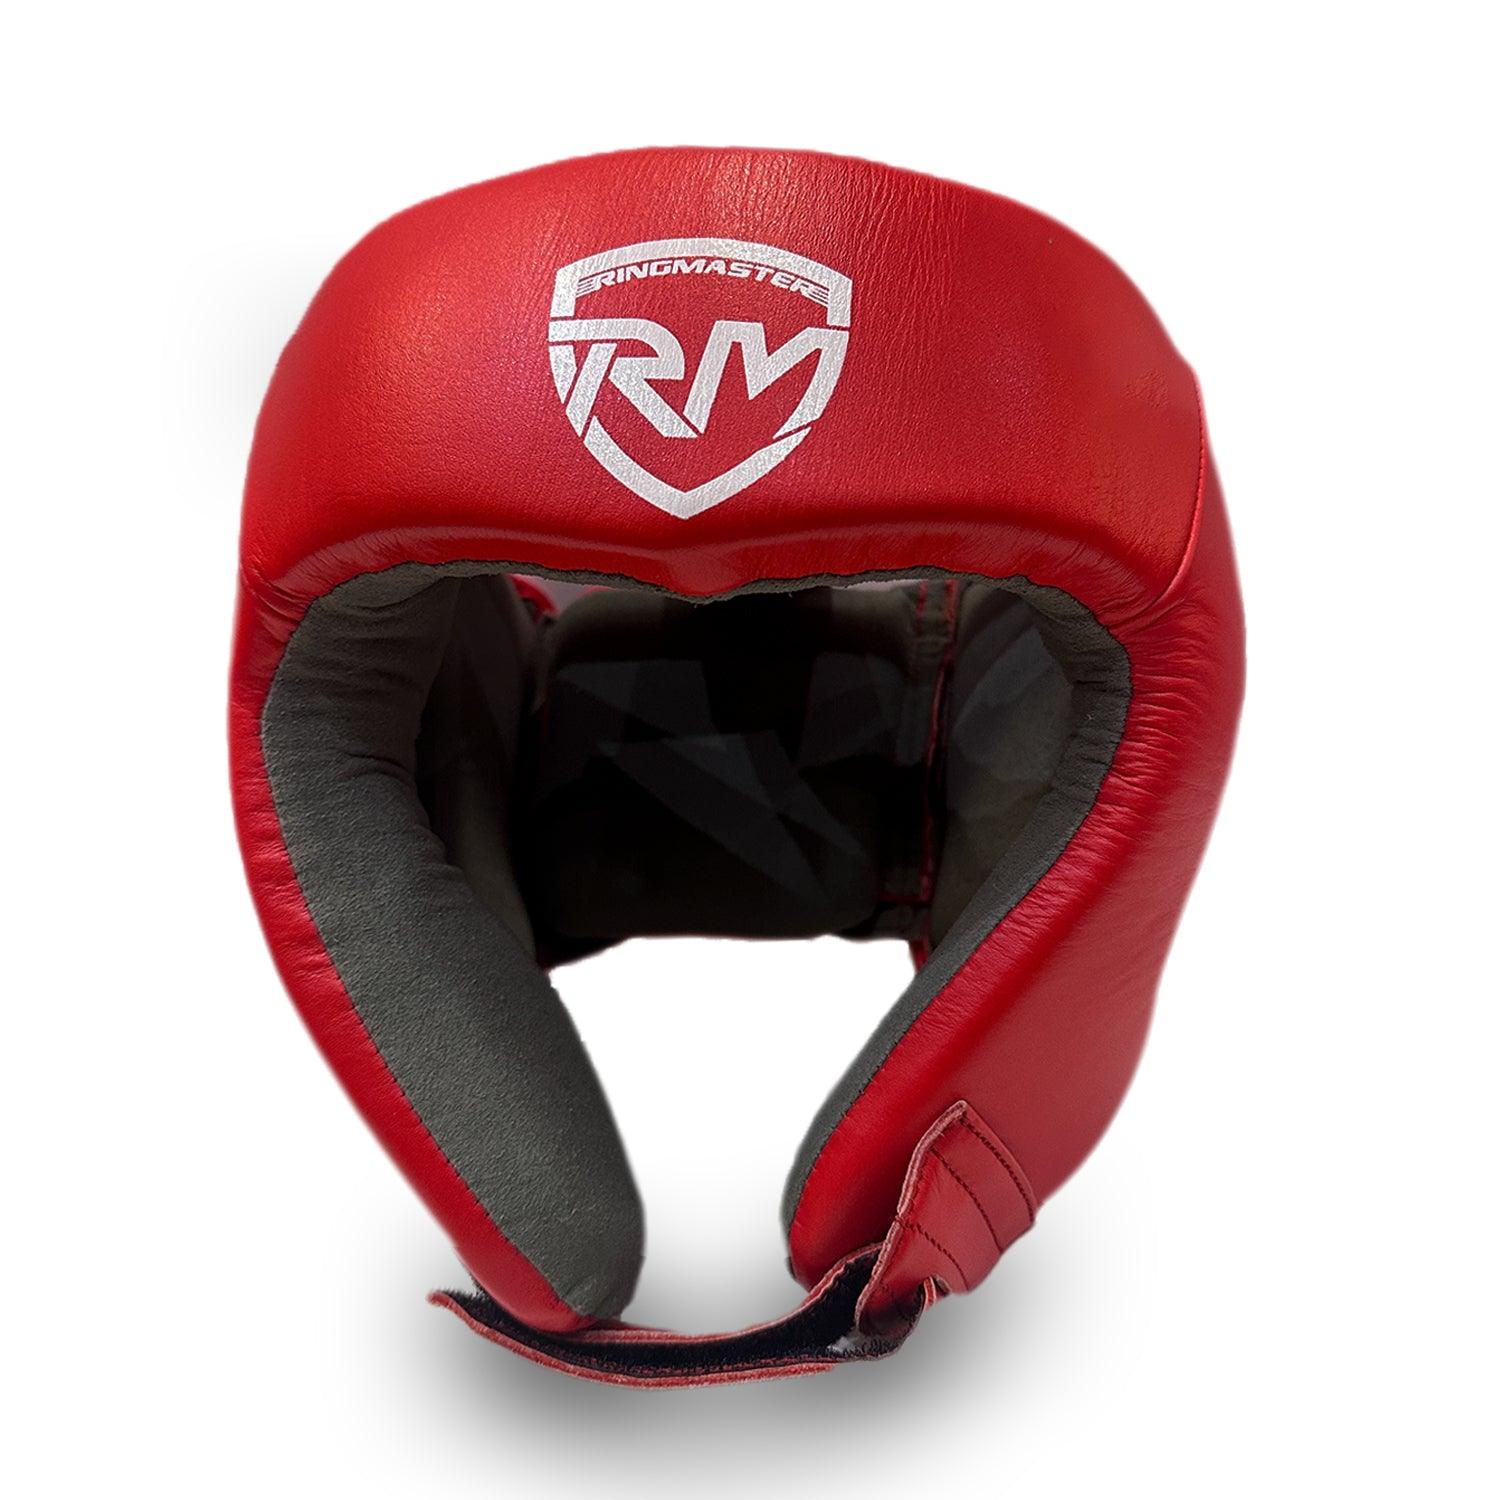 Ringmaster Head guard Boxing, Best boxing head guard, boxing head guard uk, MMA head guard, boxing headgear, Martial Arts head guard, boxing head guard open face, Boxing head guard for sale, face guard boxing, Red Head guard Boxing, RingMaster Sports Open Face Boxing HeadGuard Synthetic Leather Red Image 1